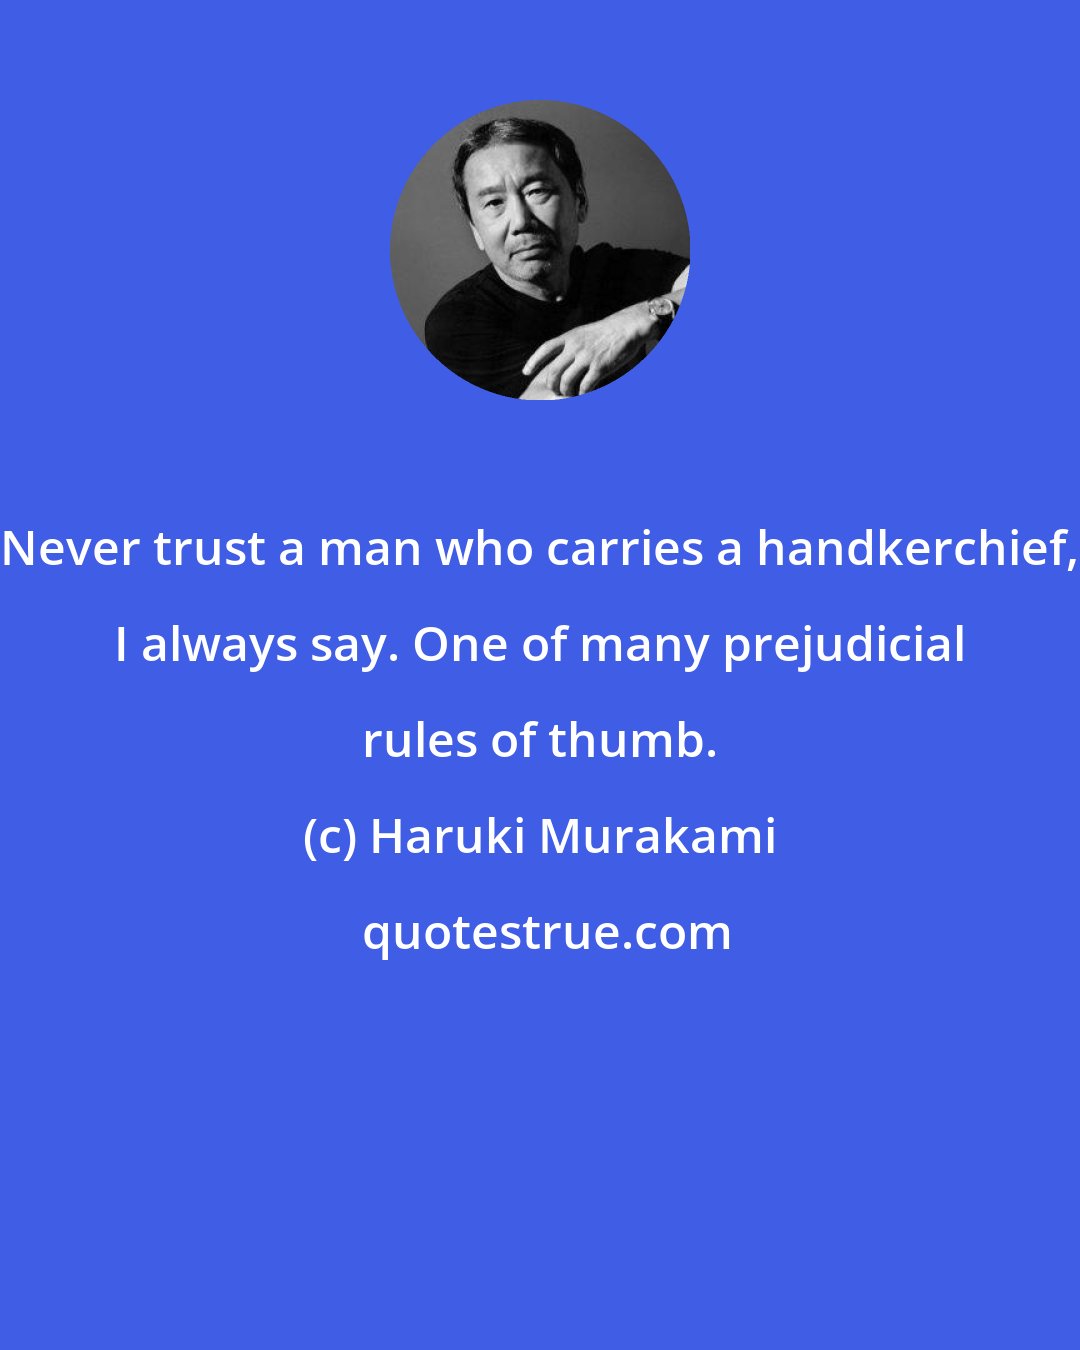 Haruki Murakami: Never trust a man who carries a handkerchief, I always say. One of many prejudicial rules of thumb.